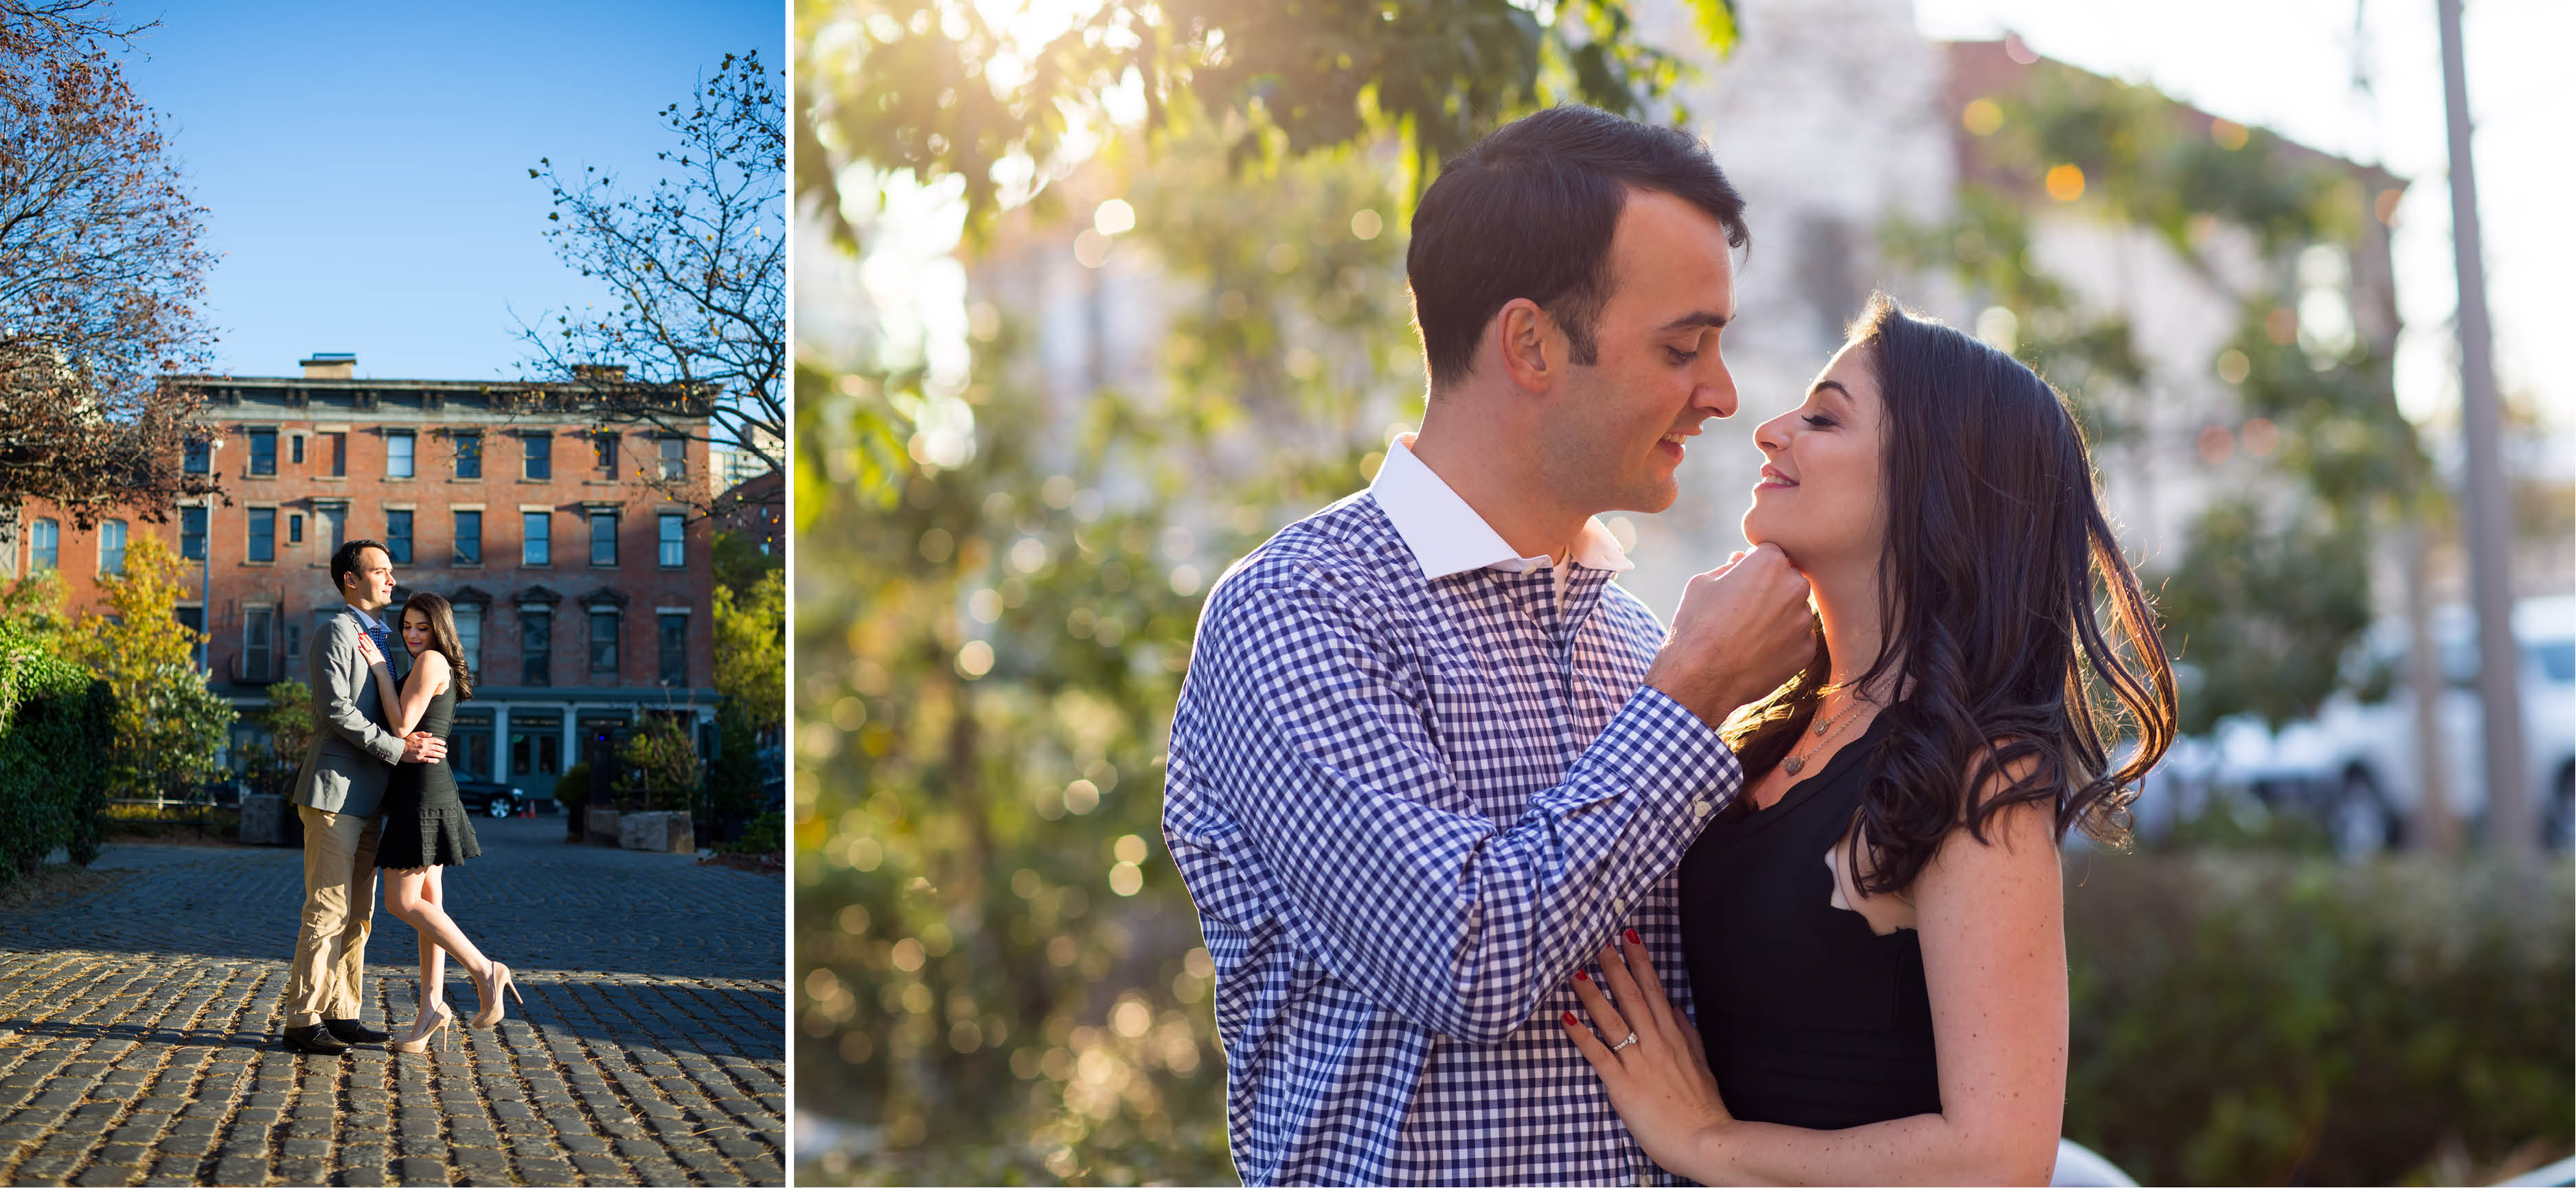 Emma_cleary_photography Dumbo Engagement shoot4